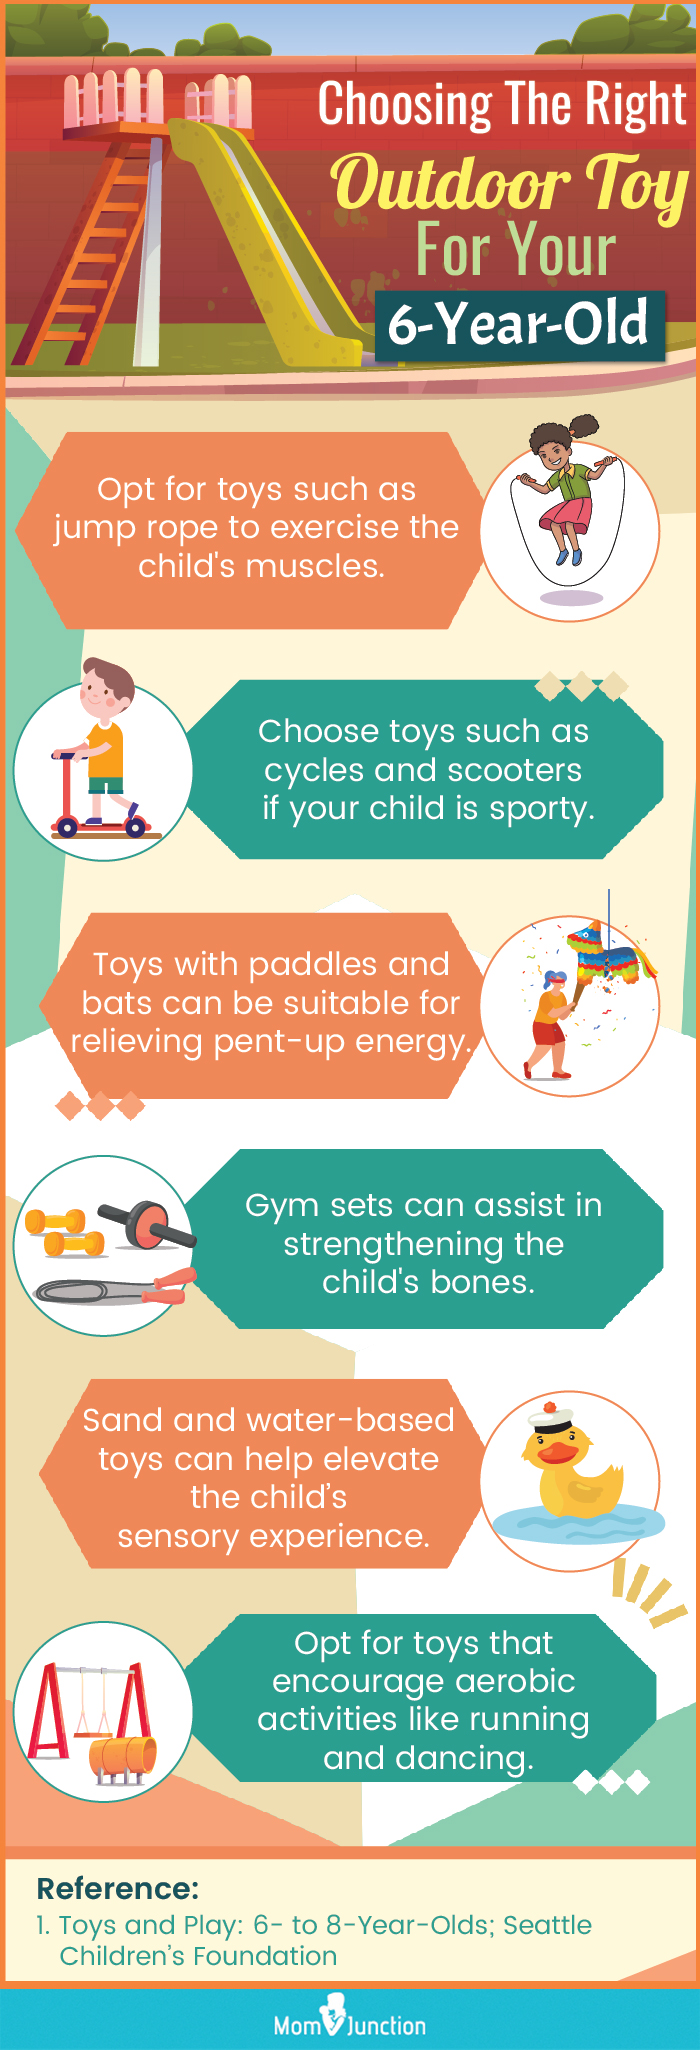 Choosing The Right Outdoor Toy For Your 6-Year-Old